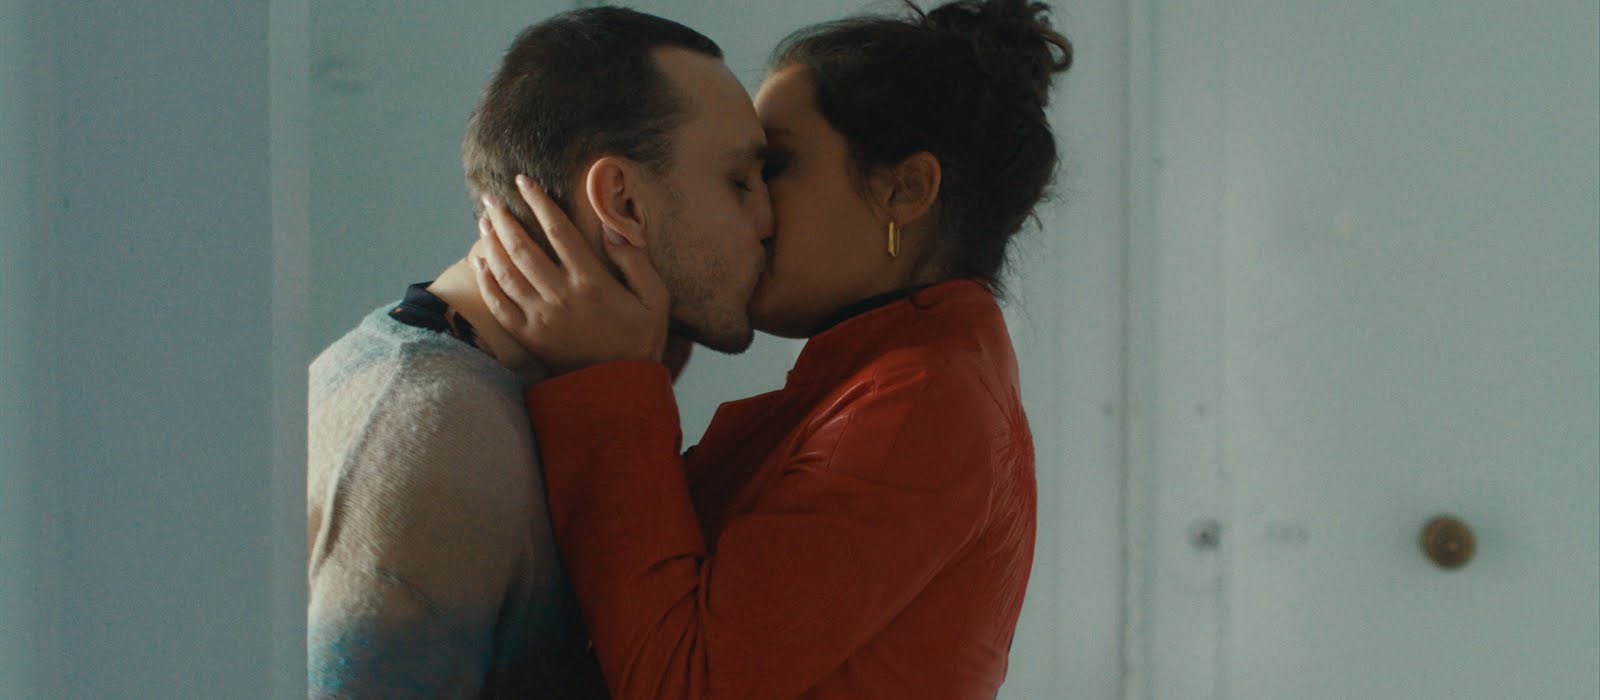 ‘Passages’: A messy (and undeniably sexy) look at modern relationships